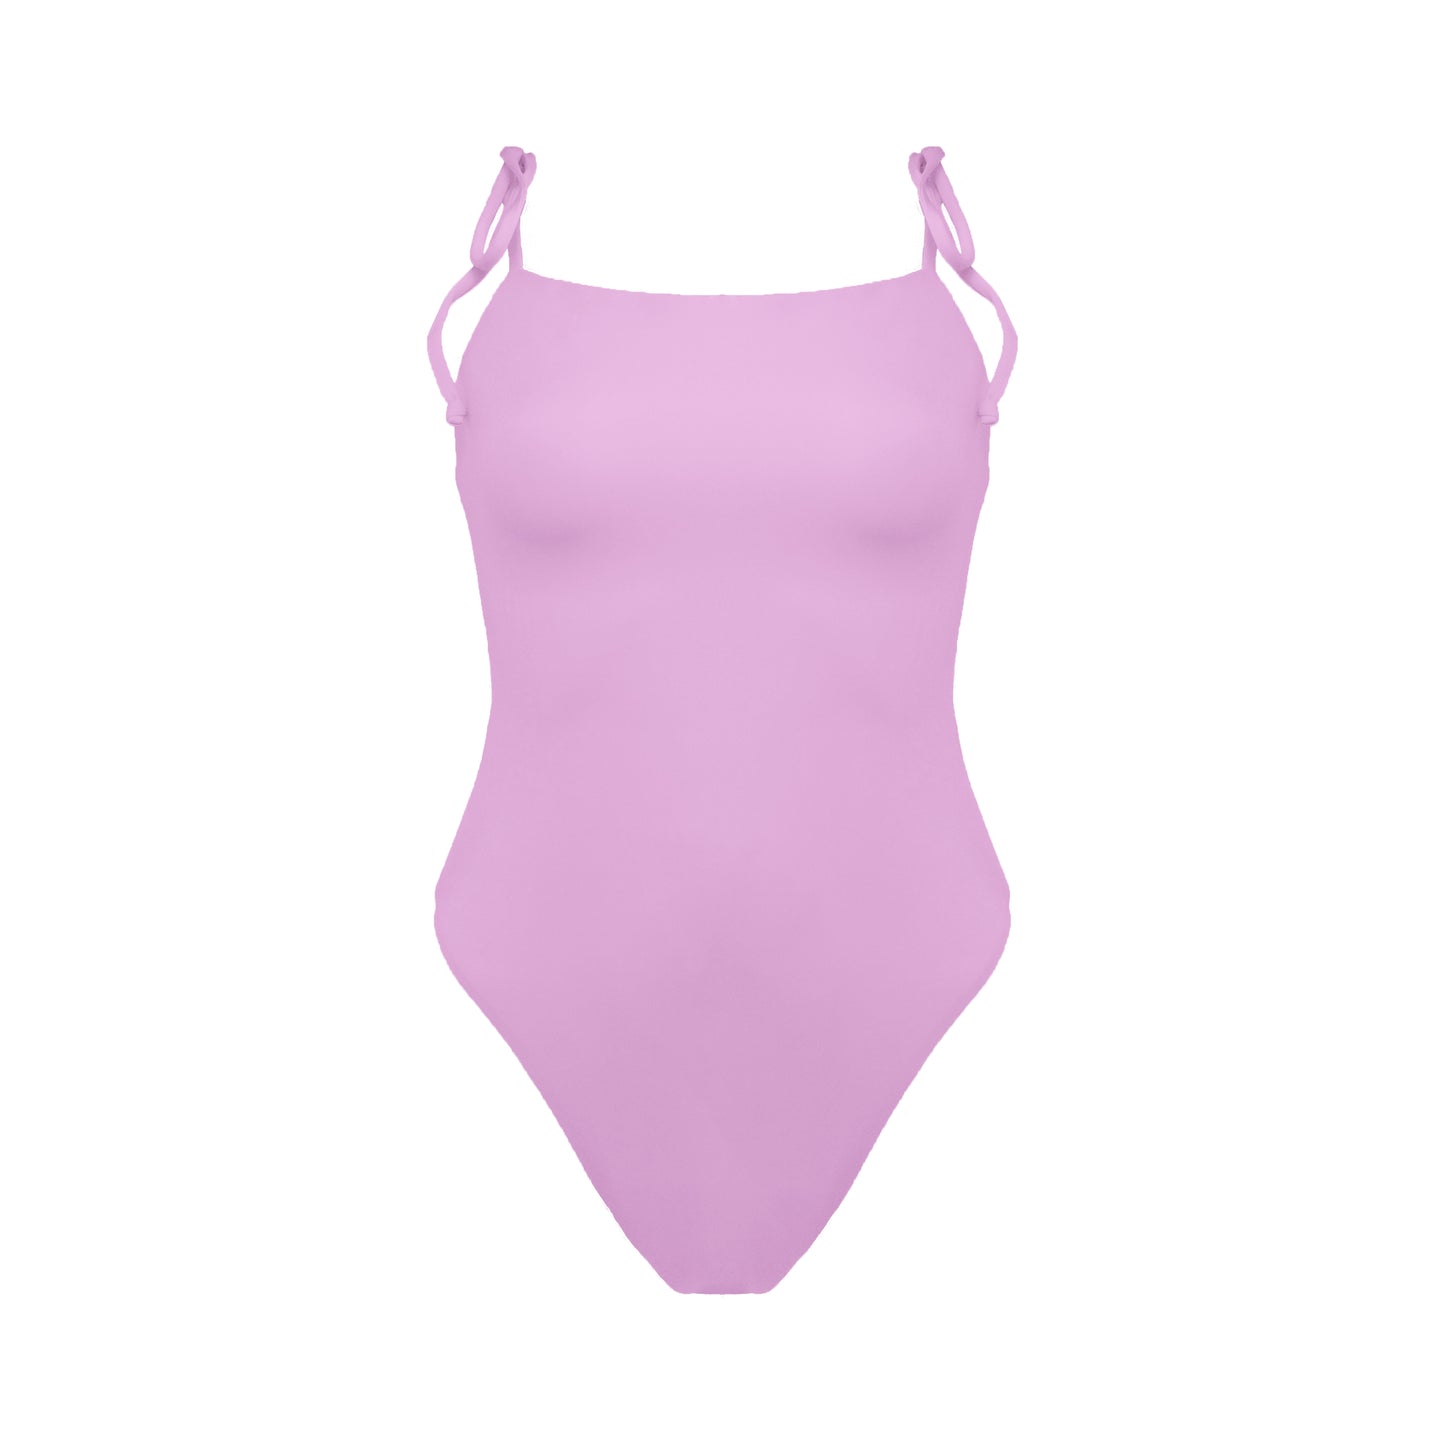 Pastel pink straight neck Tuscany one piece swimsuit with adjustable tie shoulder straps and full bum coverage